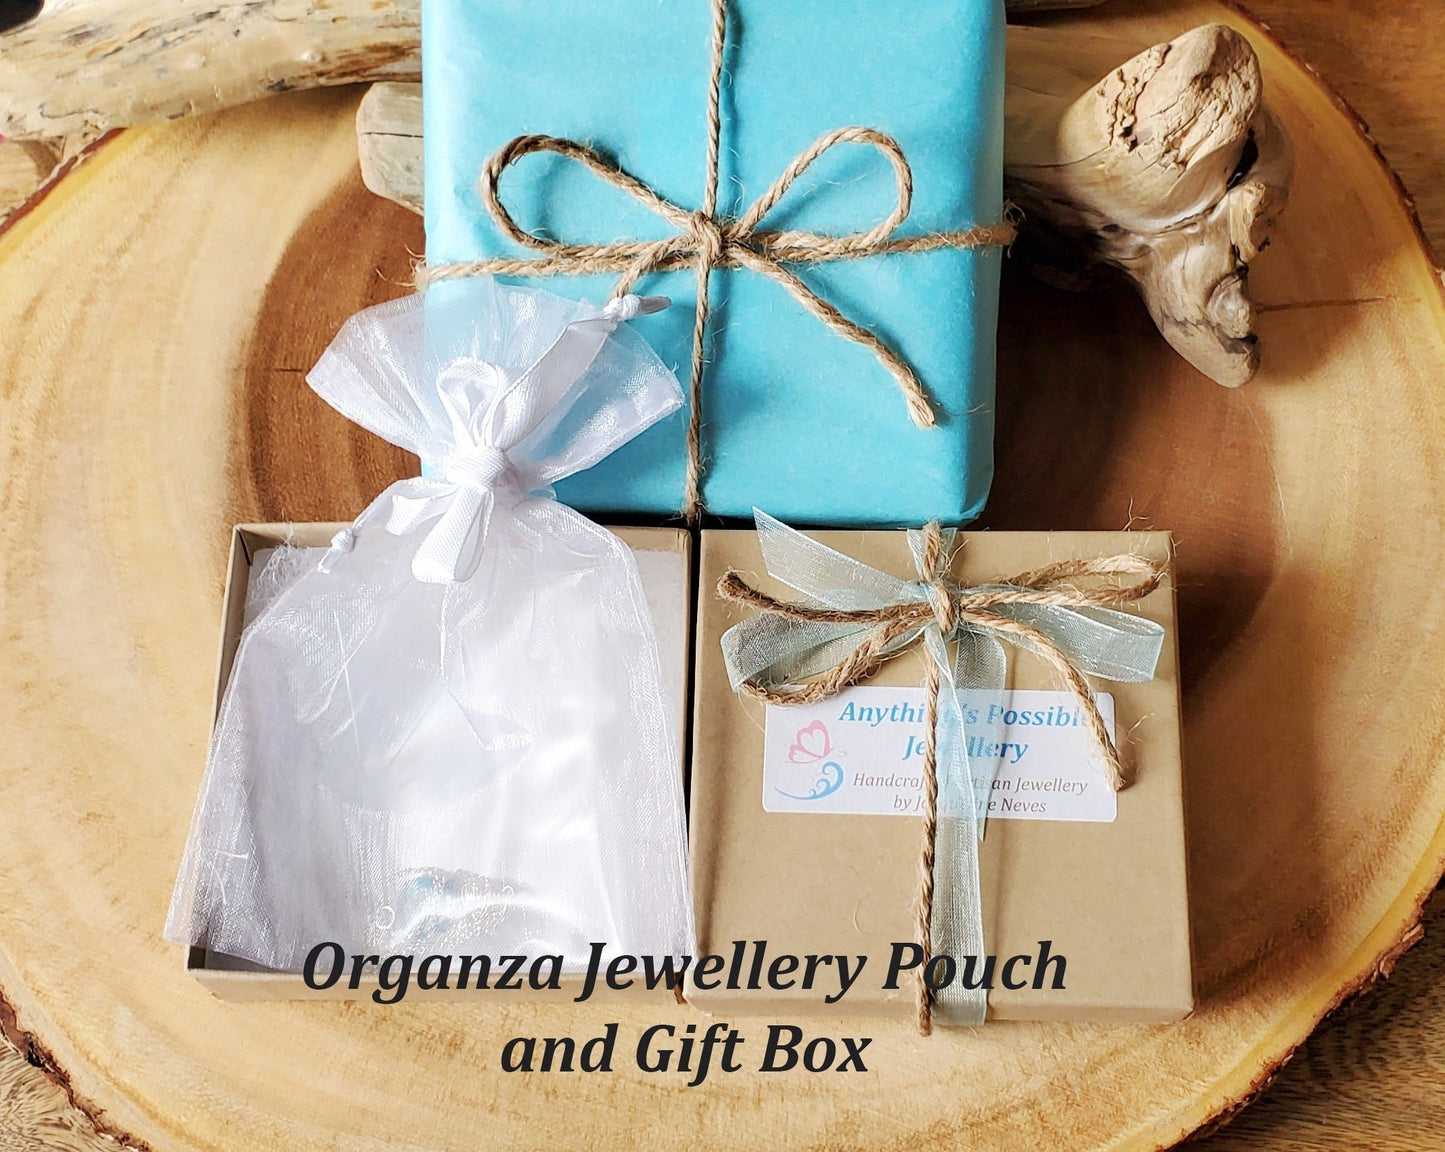 Eco Friendlier Recycled Paper Gift Box, Reusable White Organza Jewellery Pouch, Tissue Paper, Ribbon, and Twine